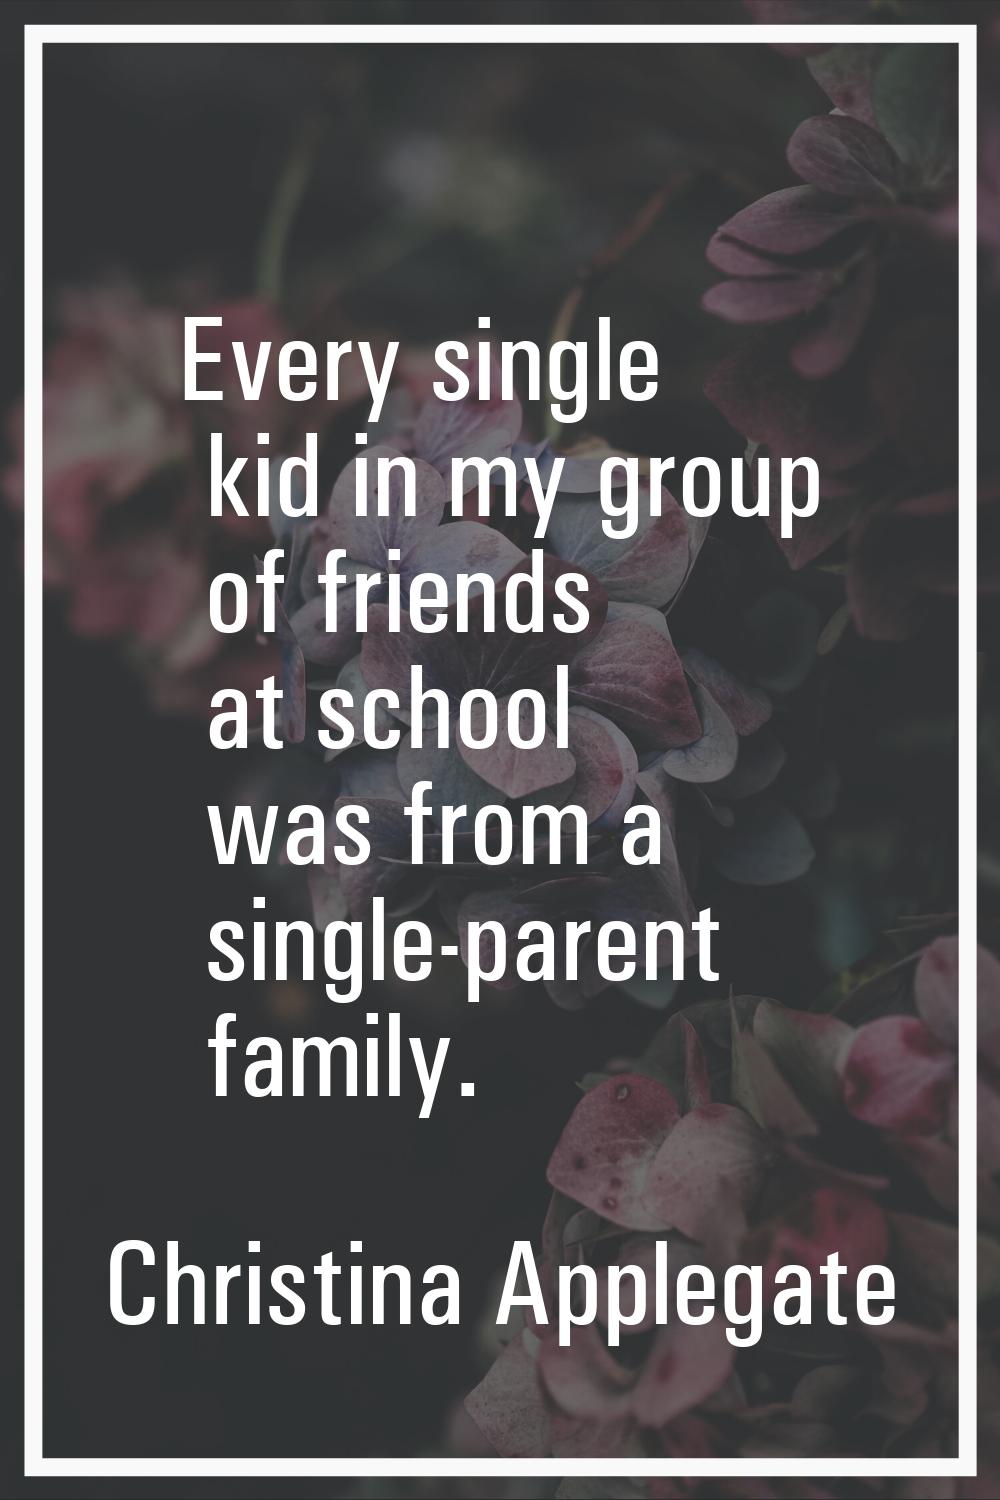 Every single kid in my group of friends at school was from a single-parent family.